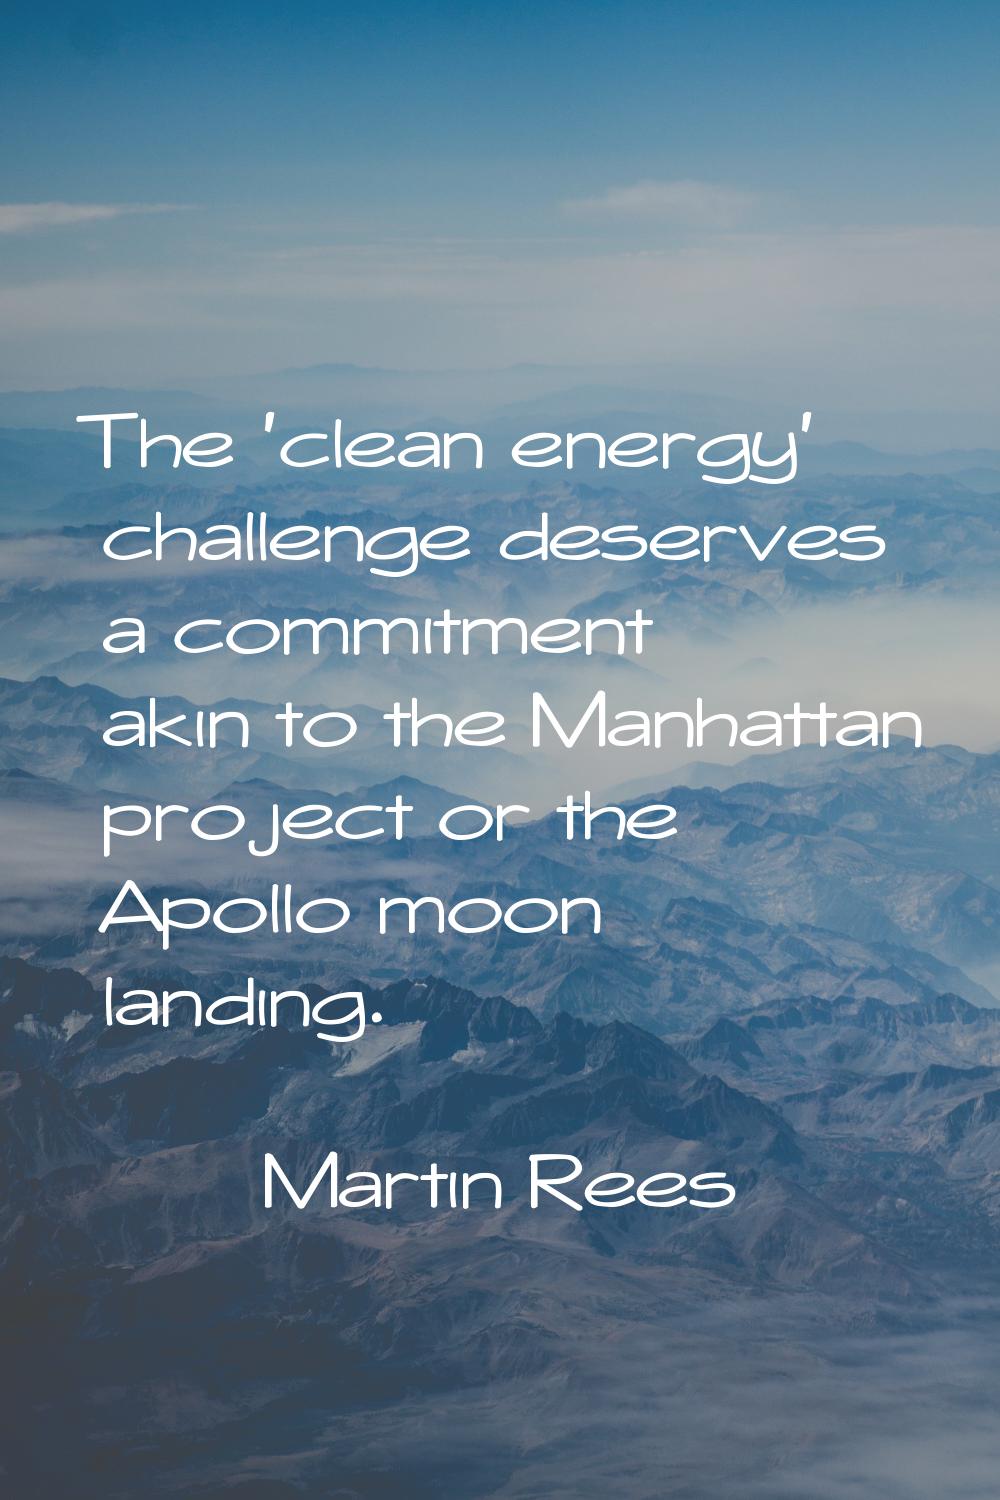 The 'clean energy' challenge deserves a commitment akin to the Manhattan project or the Apollo moon